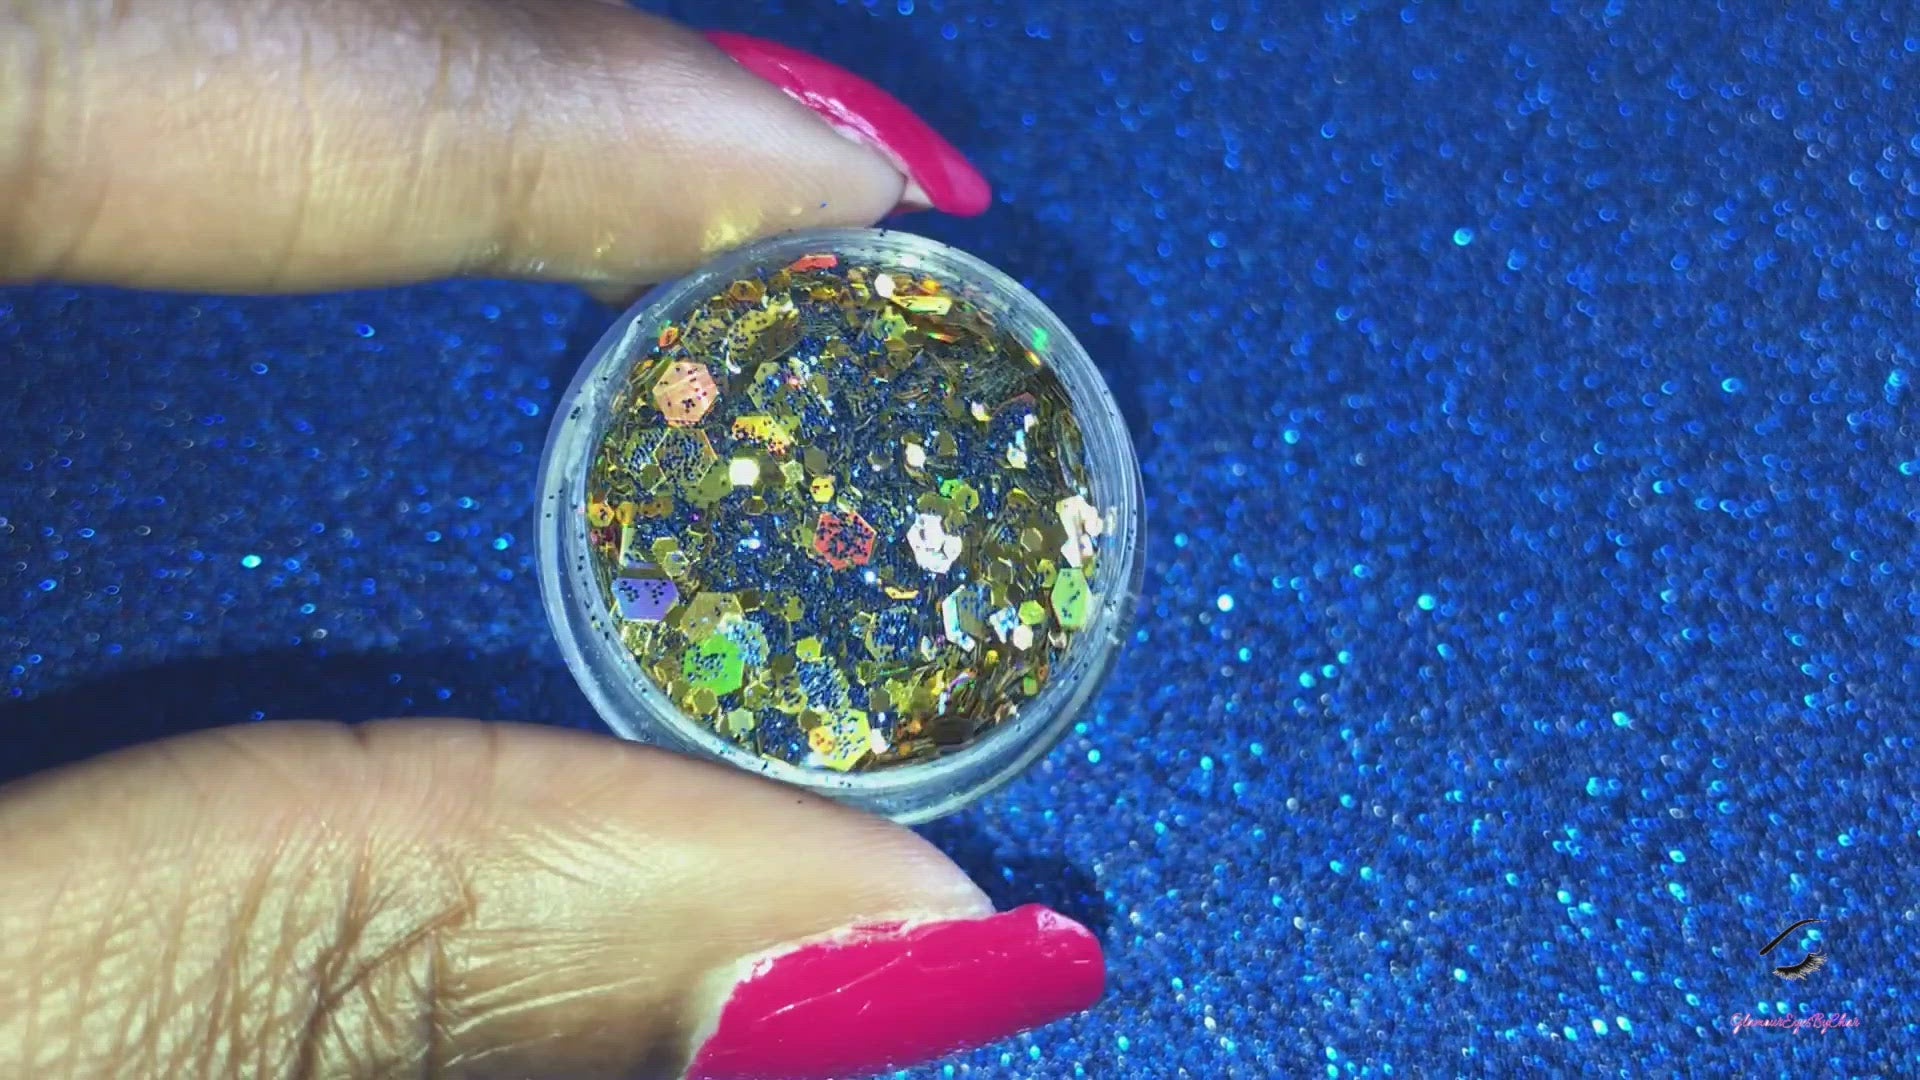 This glitter is called Barbados 🇧🇧 and is part of the super chunky glitter collection.  It consists of royal blue and gold glitter with a dazzling holographic sparkle. Barbados can be used for your face, body, hair and nails. Comes in 5g jars only. 